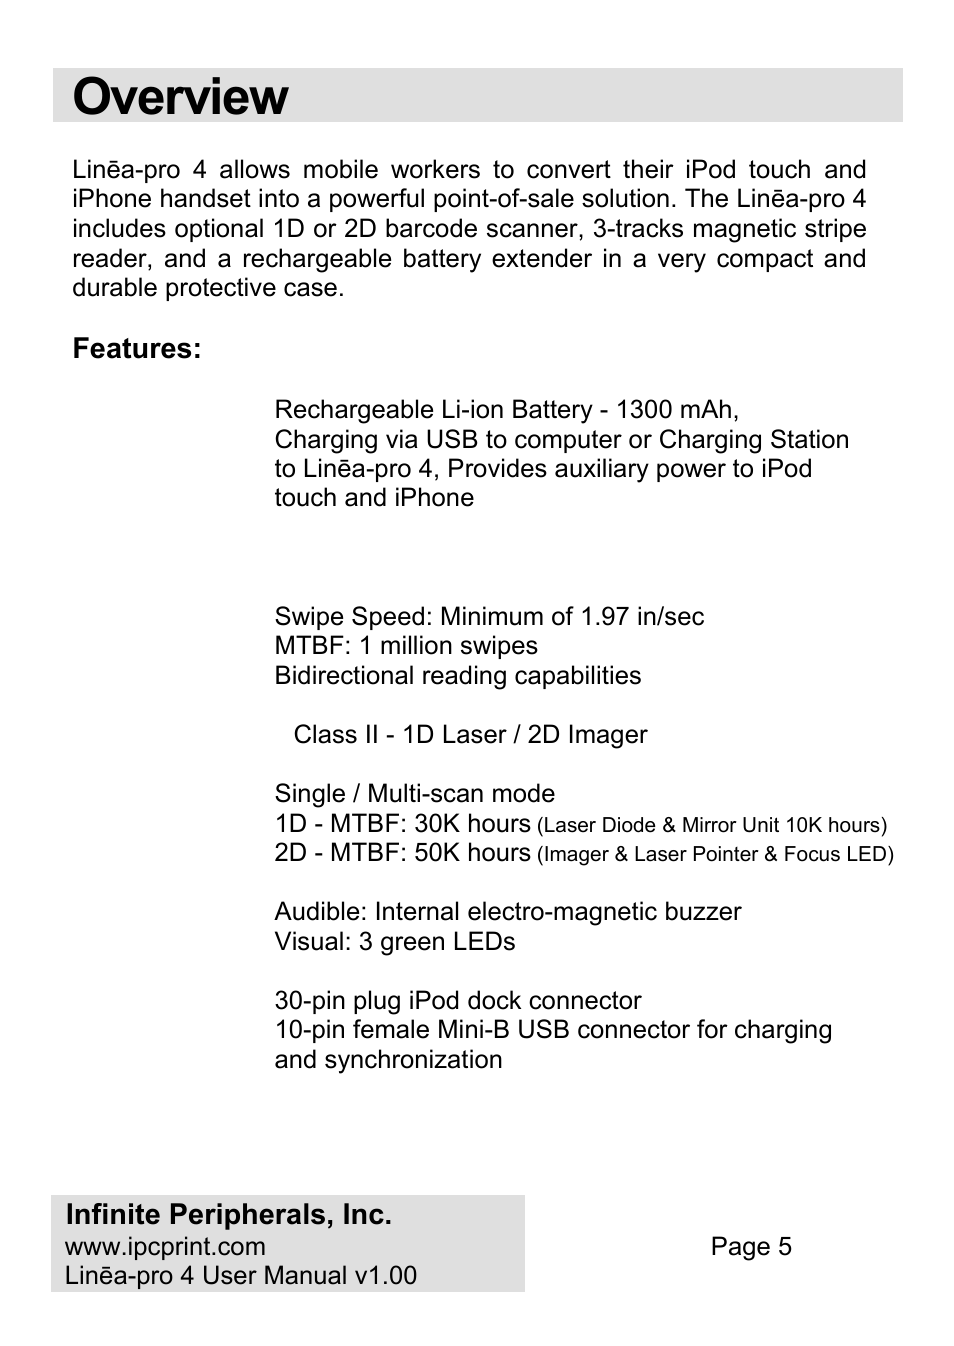 Overview | Infinite Peripherals PRO 4 User Manual | Page 5 / 24